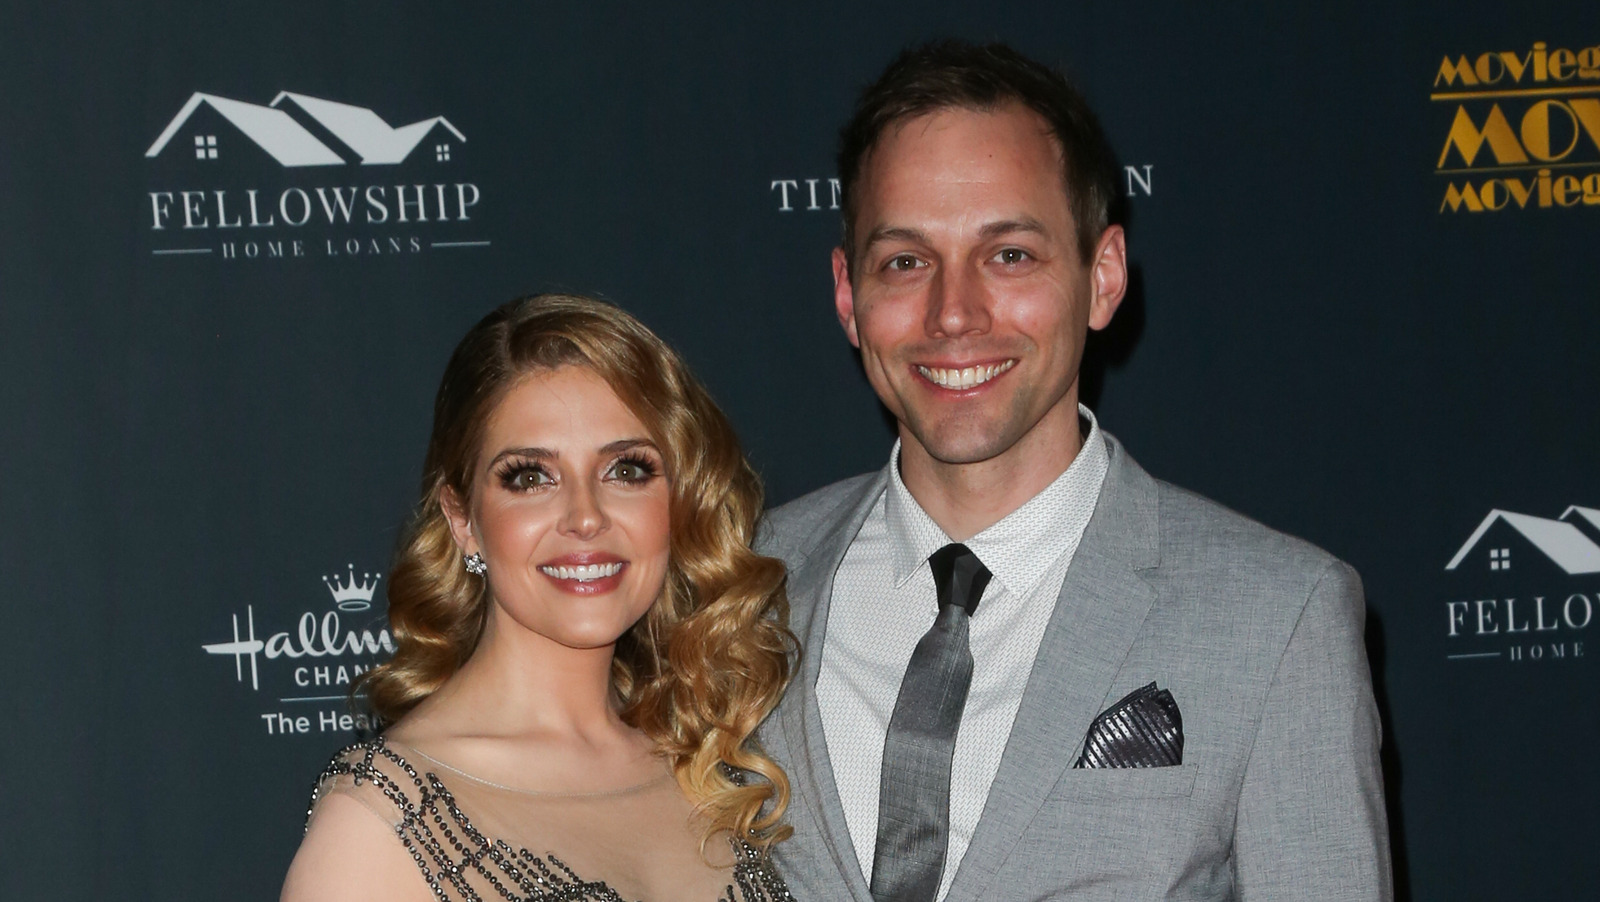 heres who hallmark star jen lilley is married to in real life